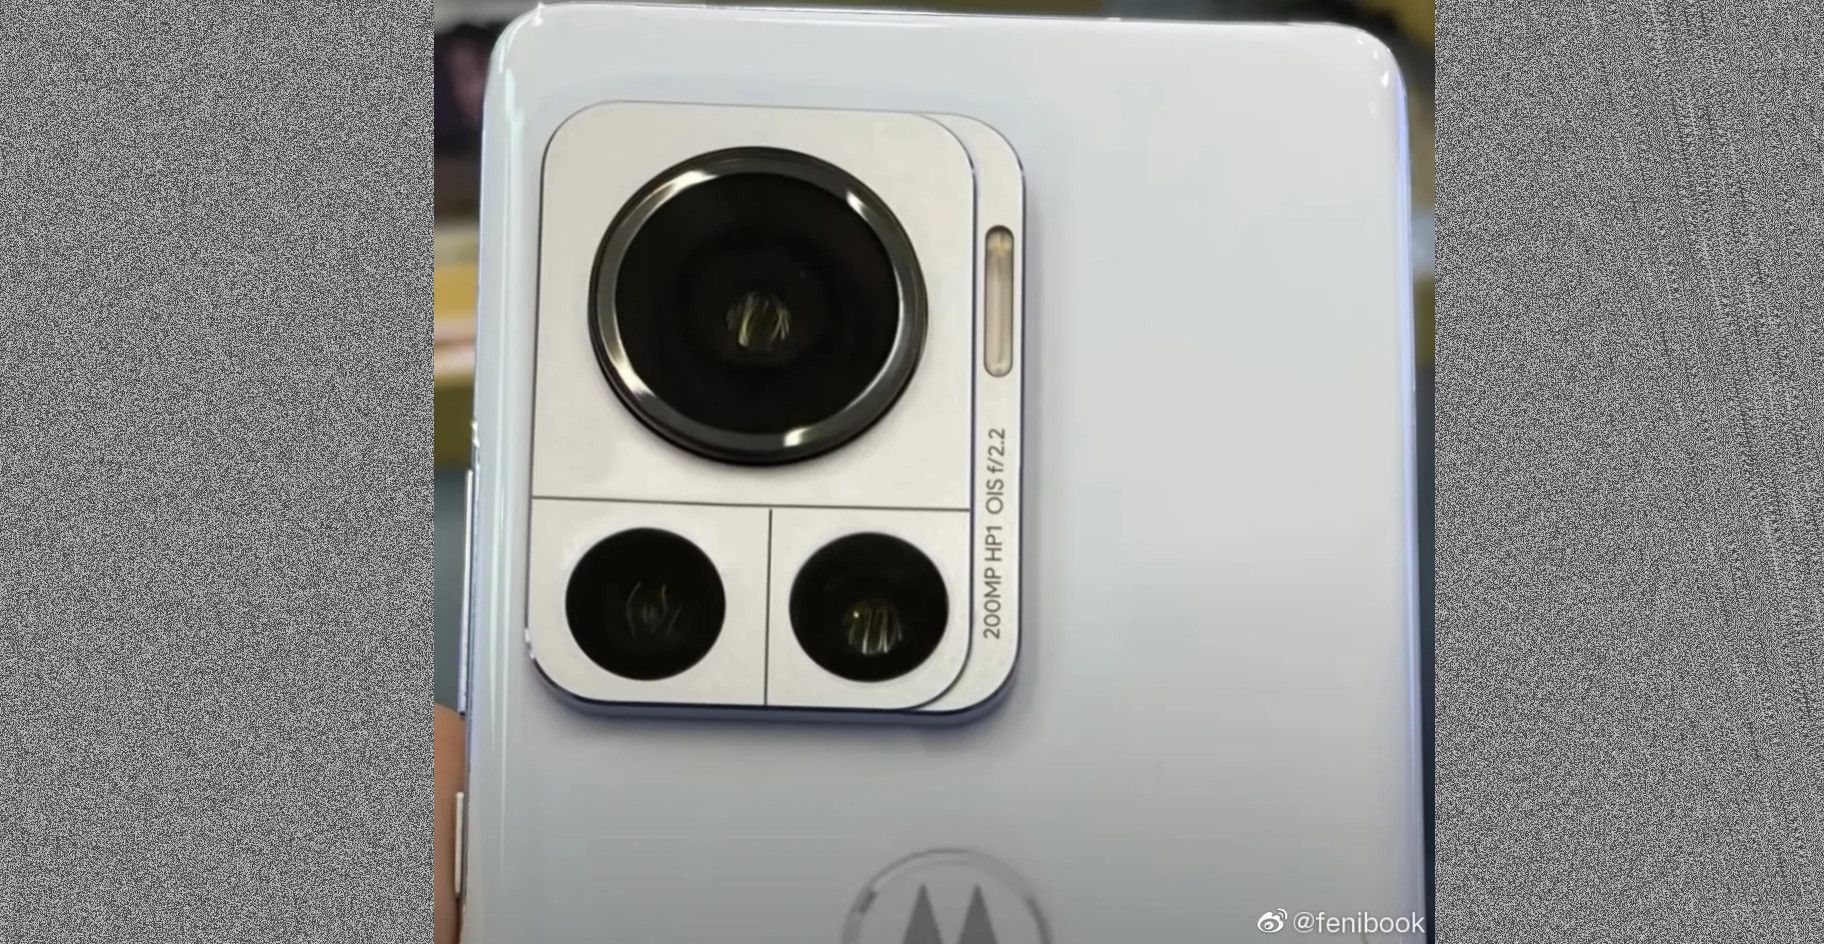 200MP Smartphone Camera Fully Revealed In Leaked Hands-On Photo